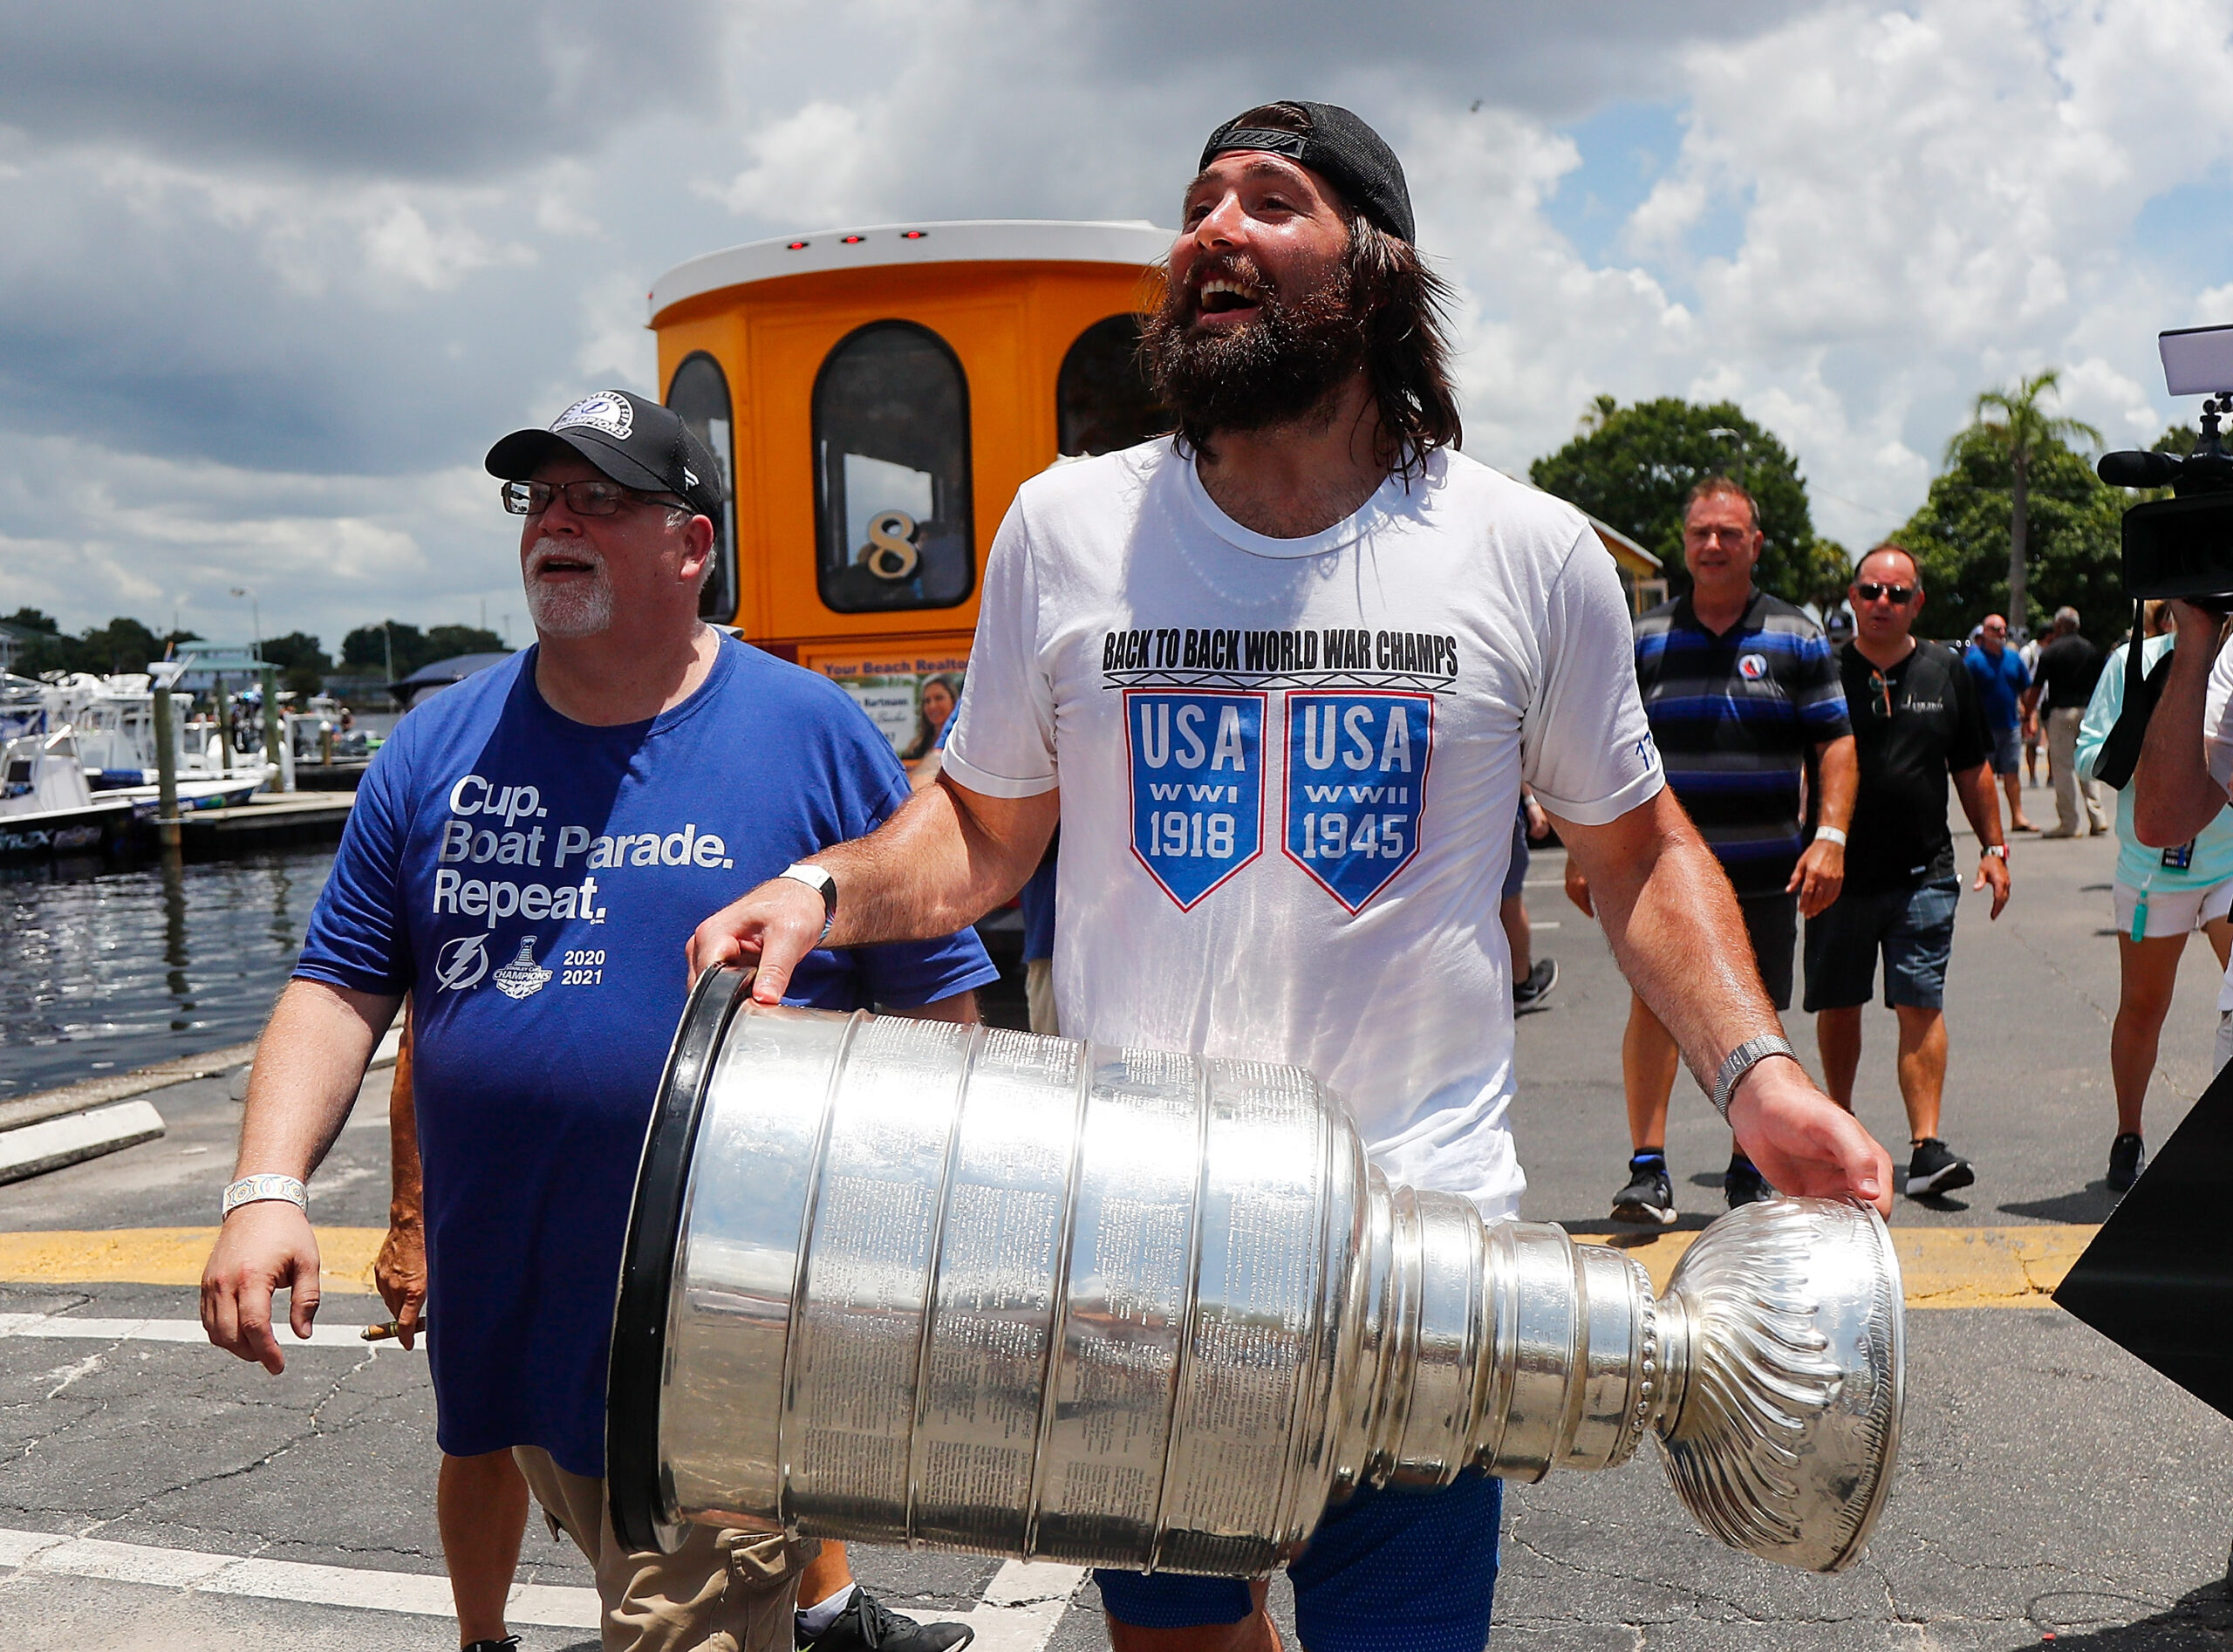 NHL: Pat Maroon owns up to damaging Stanley Cup